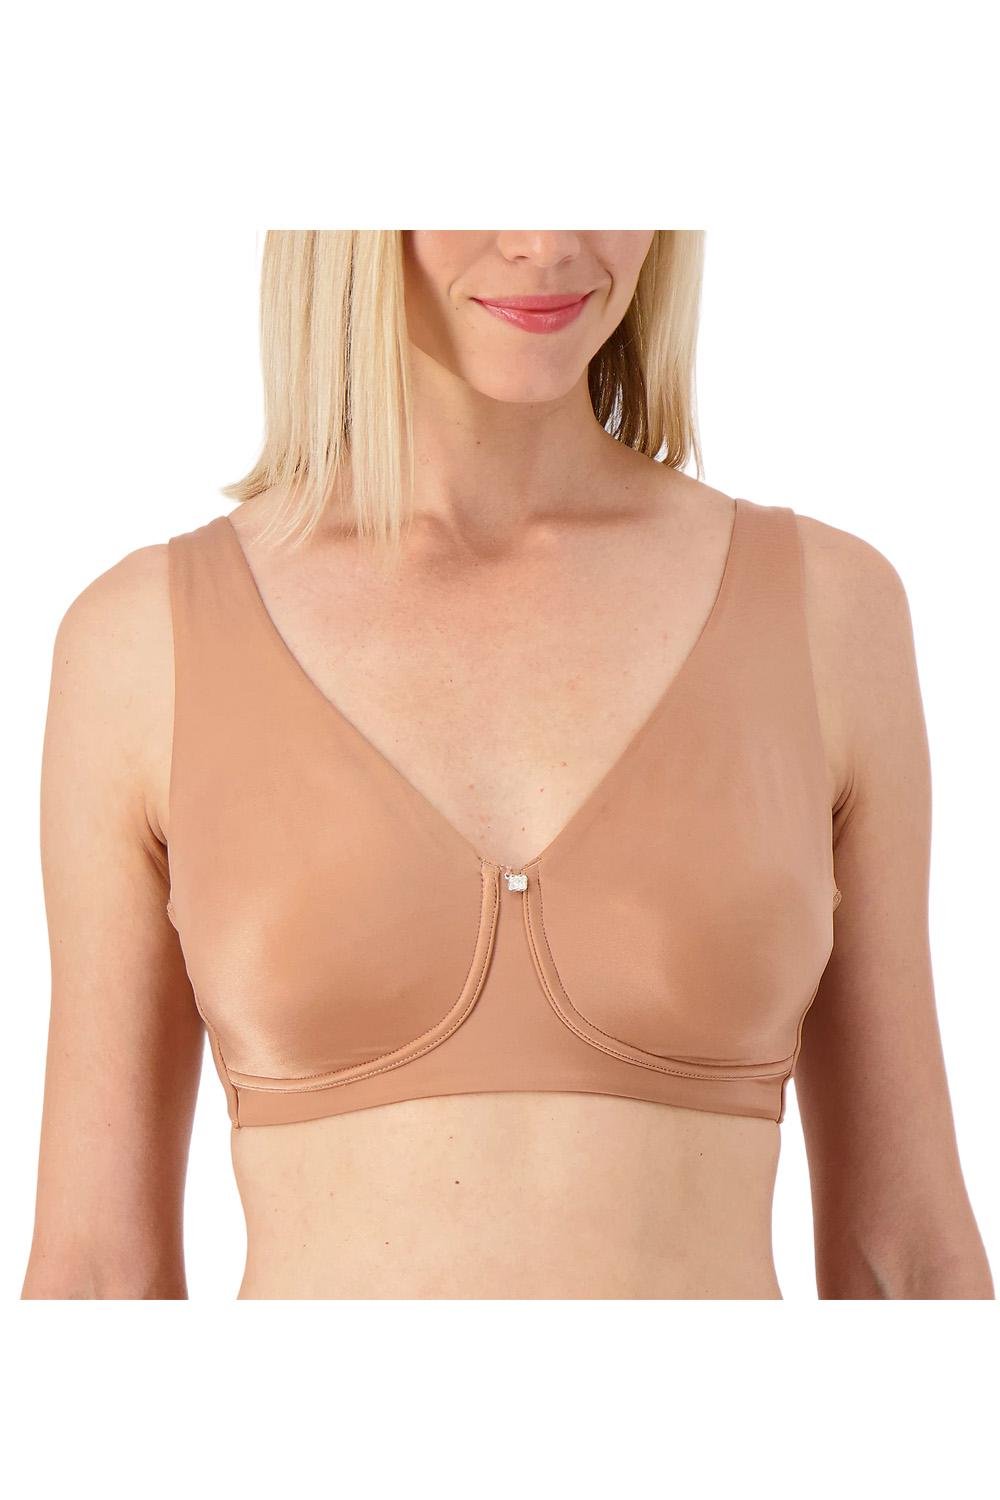 Breezies Satin Shine Unlined Wirefree Support Bra Warm Sand